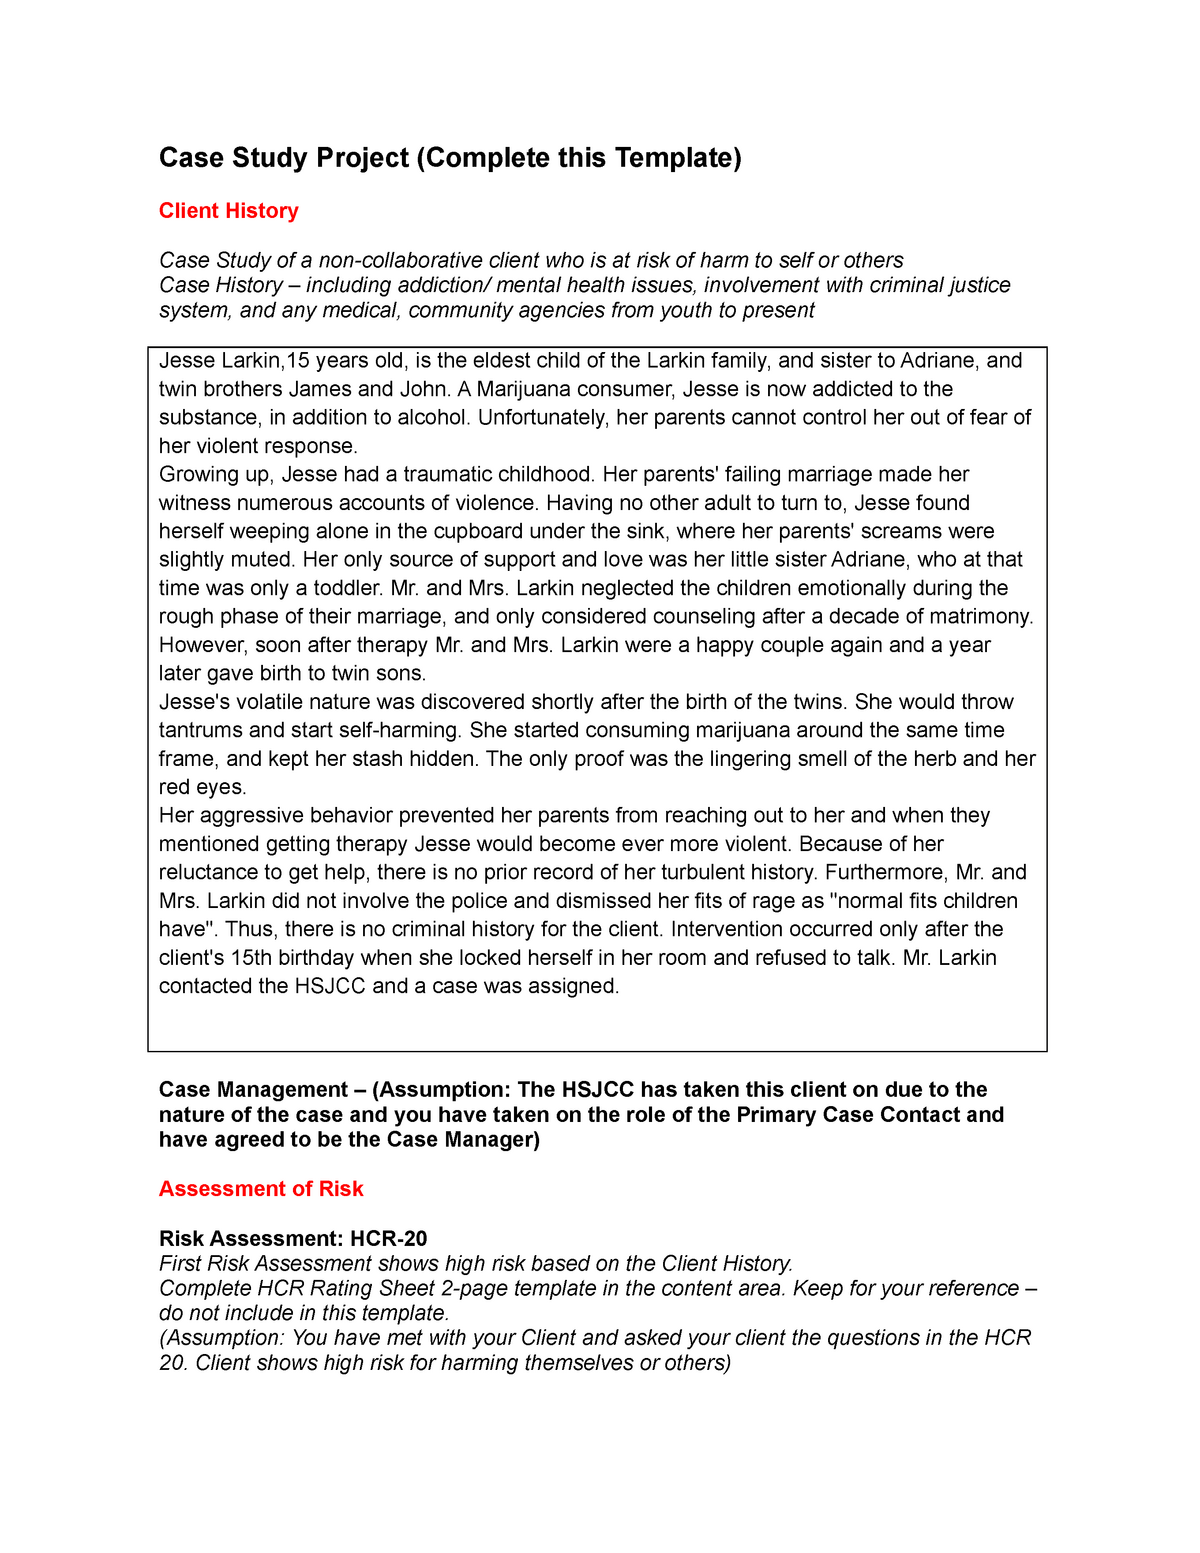 Case study project - Case Study Project (Complete this Template) Client ...